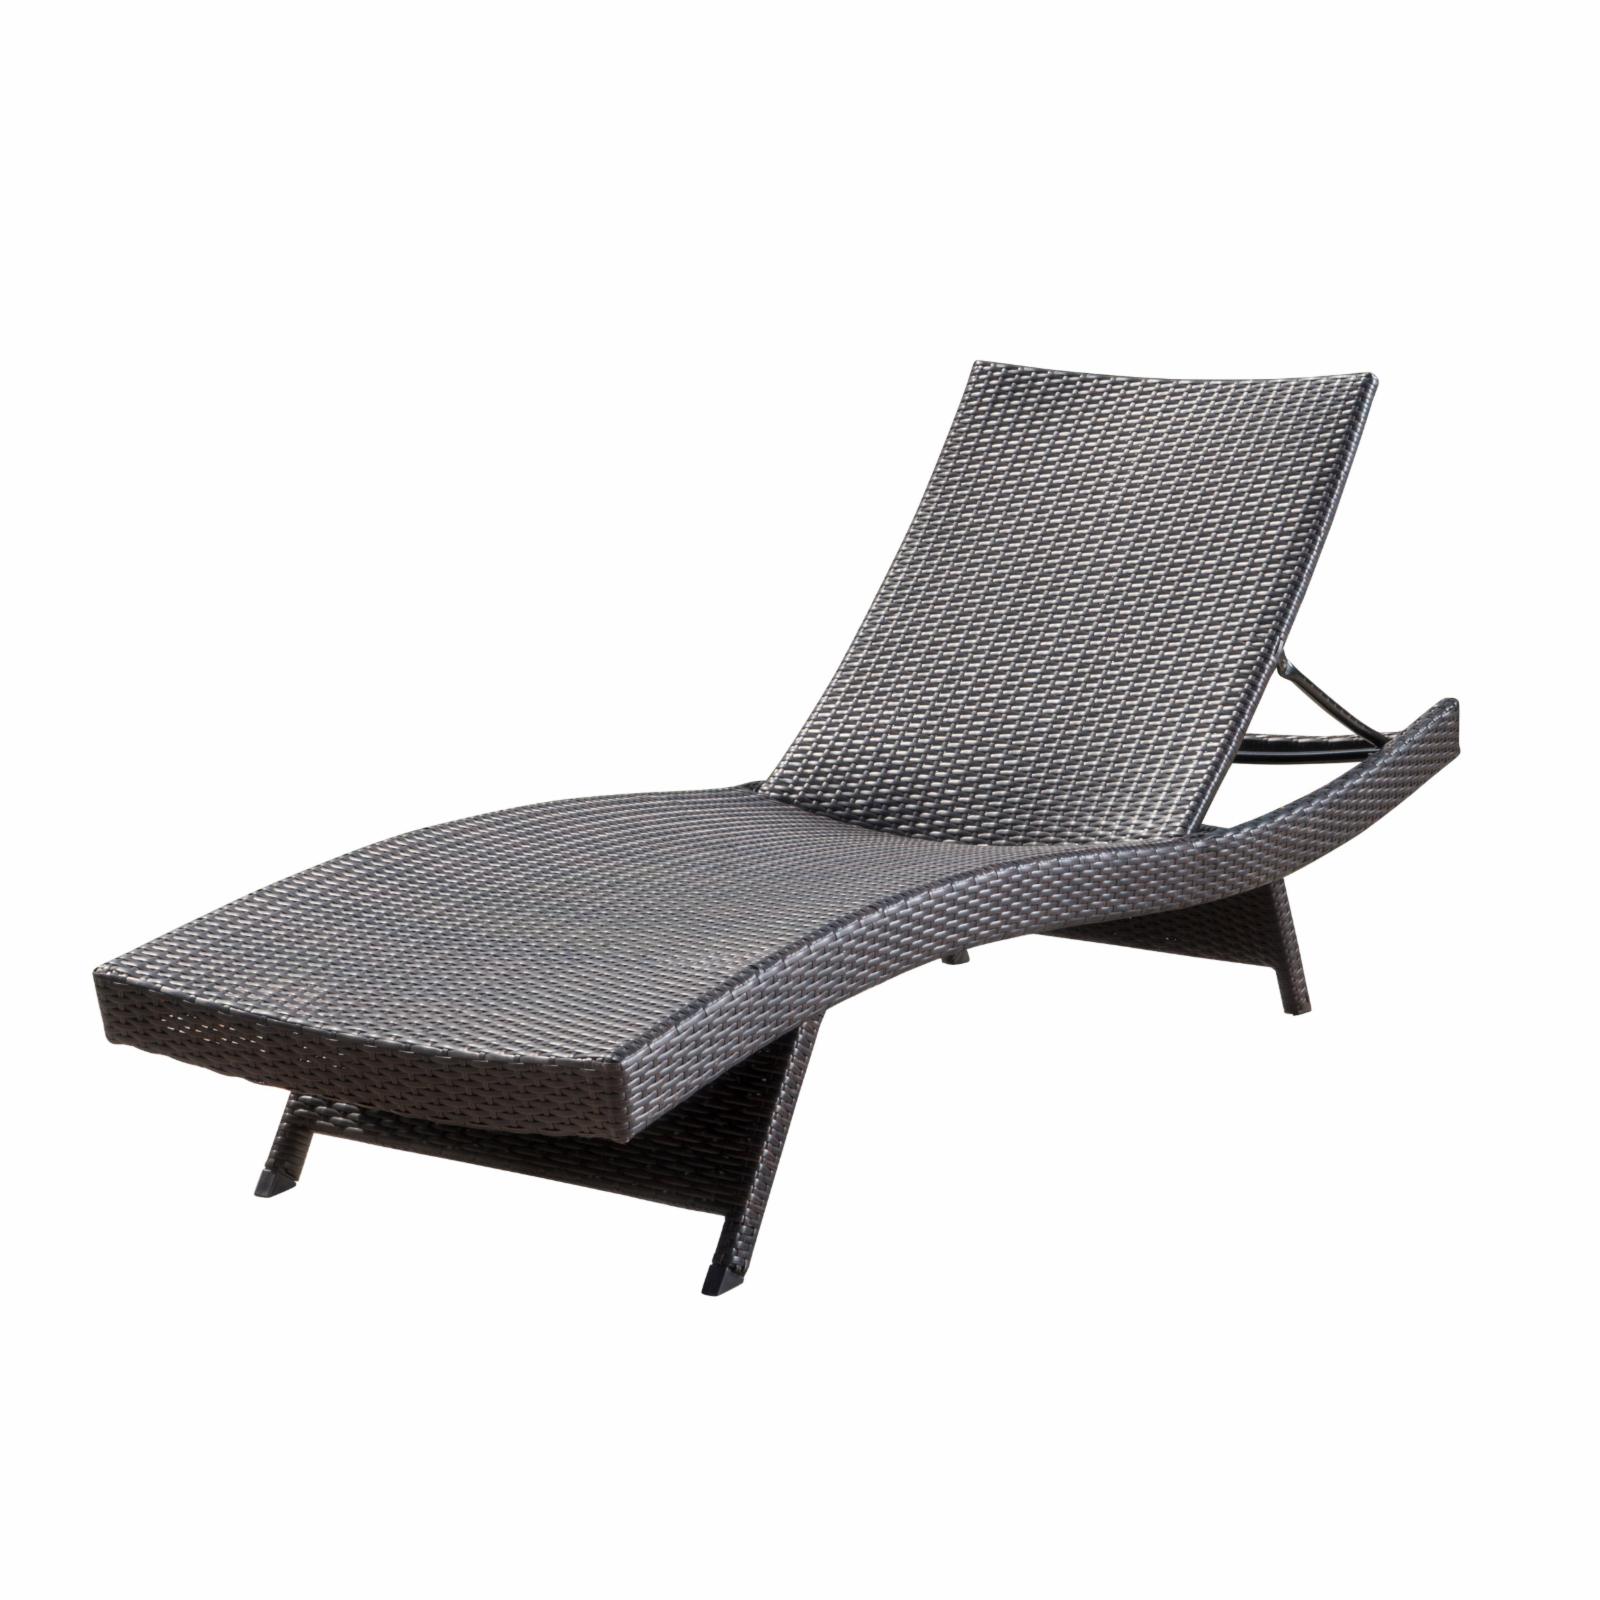 Lenin Outdoor Wicker Chaise Lounge Chair - Multi-Brown - image 1 of 11